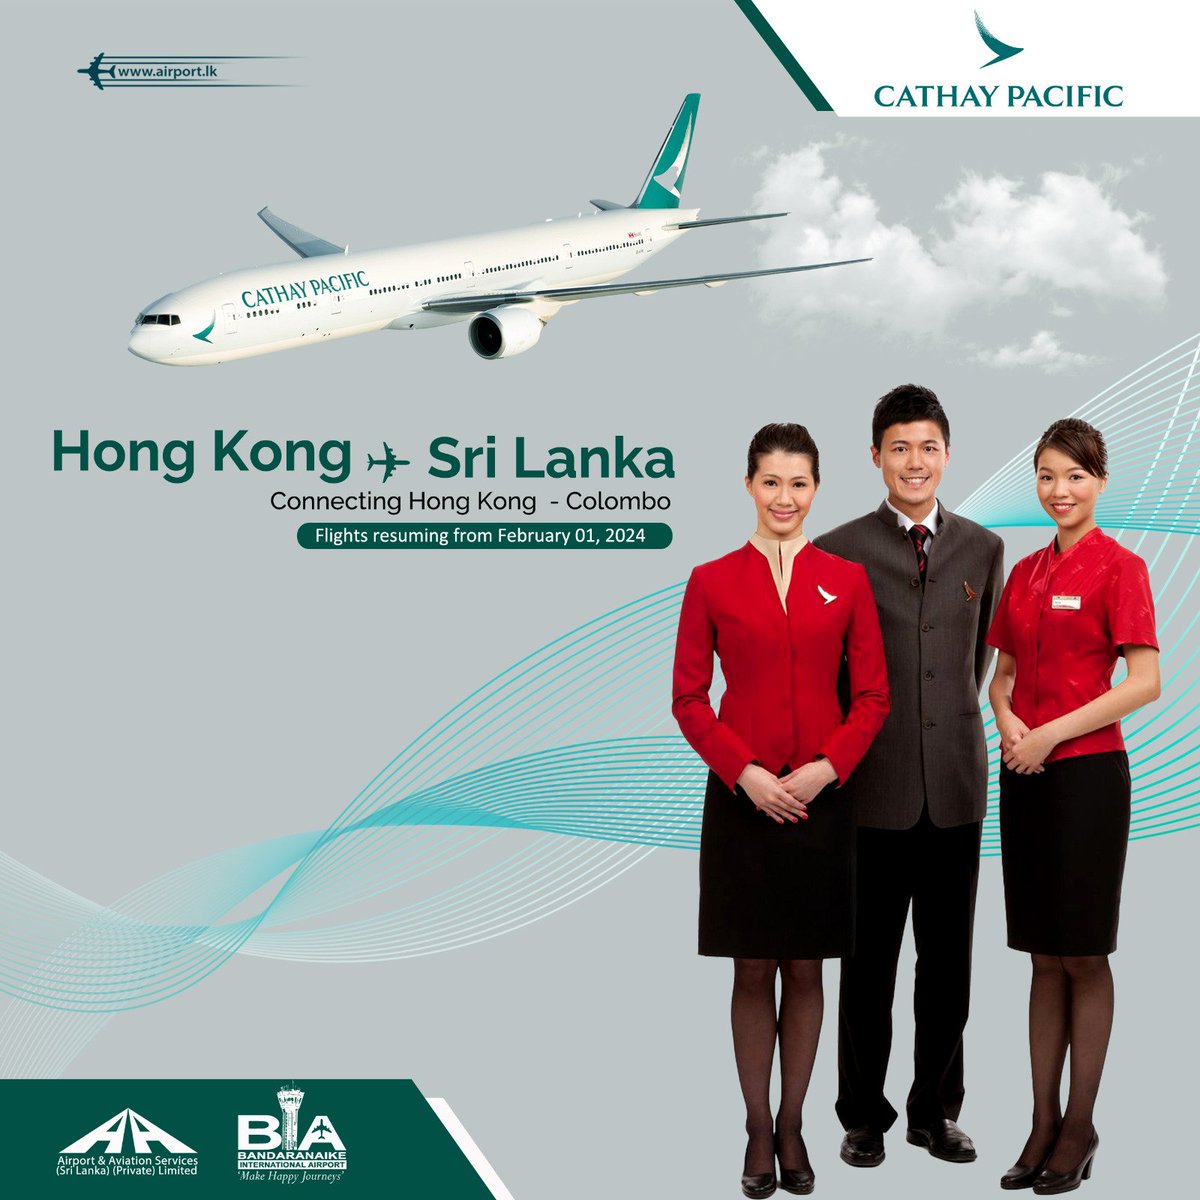 Exciting news! It’s lovely to see @cathaypacific back in Sri Lanka! Cathay Pacific is back in action at BIA with three weekly flights between Hong Kong (HKG) and Colombo (CMB). #SriLankaAirports #BIAsrilanka